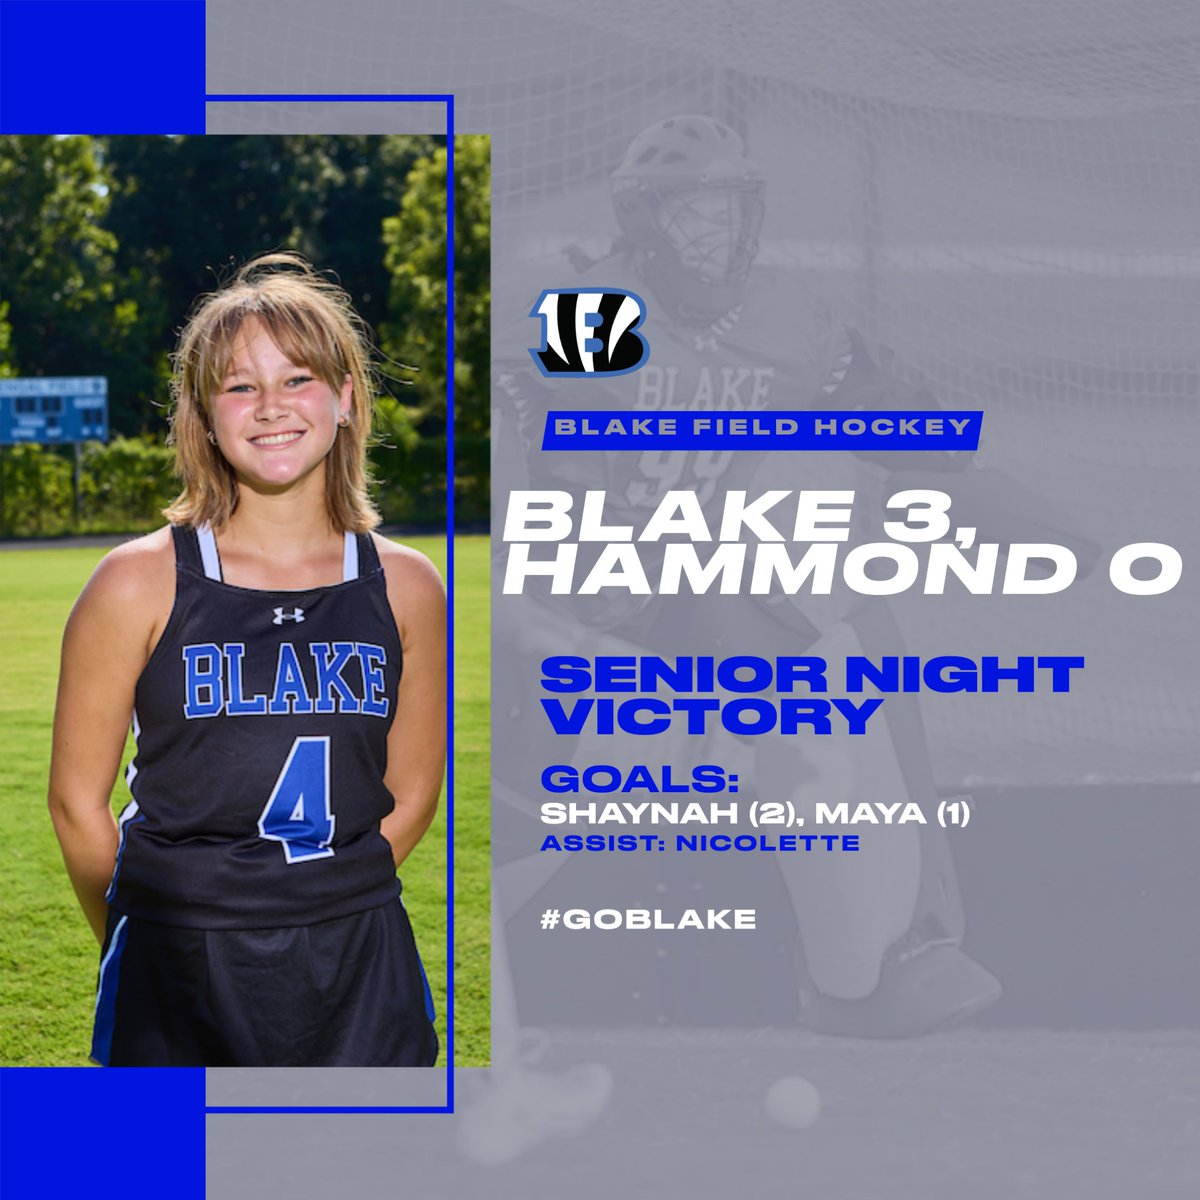 Congrats to Blake Field Hockey, 3-0 winners on Senior Night over Hammond High School. Shaynah Bickers led the Bengals with two goals. Maya Resnikoff had a goal and Nicolette Tracewski had an assist.